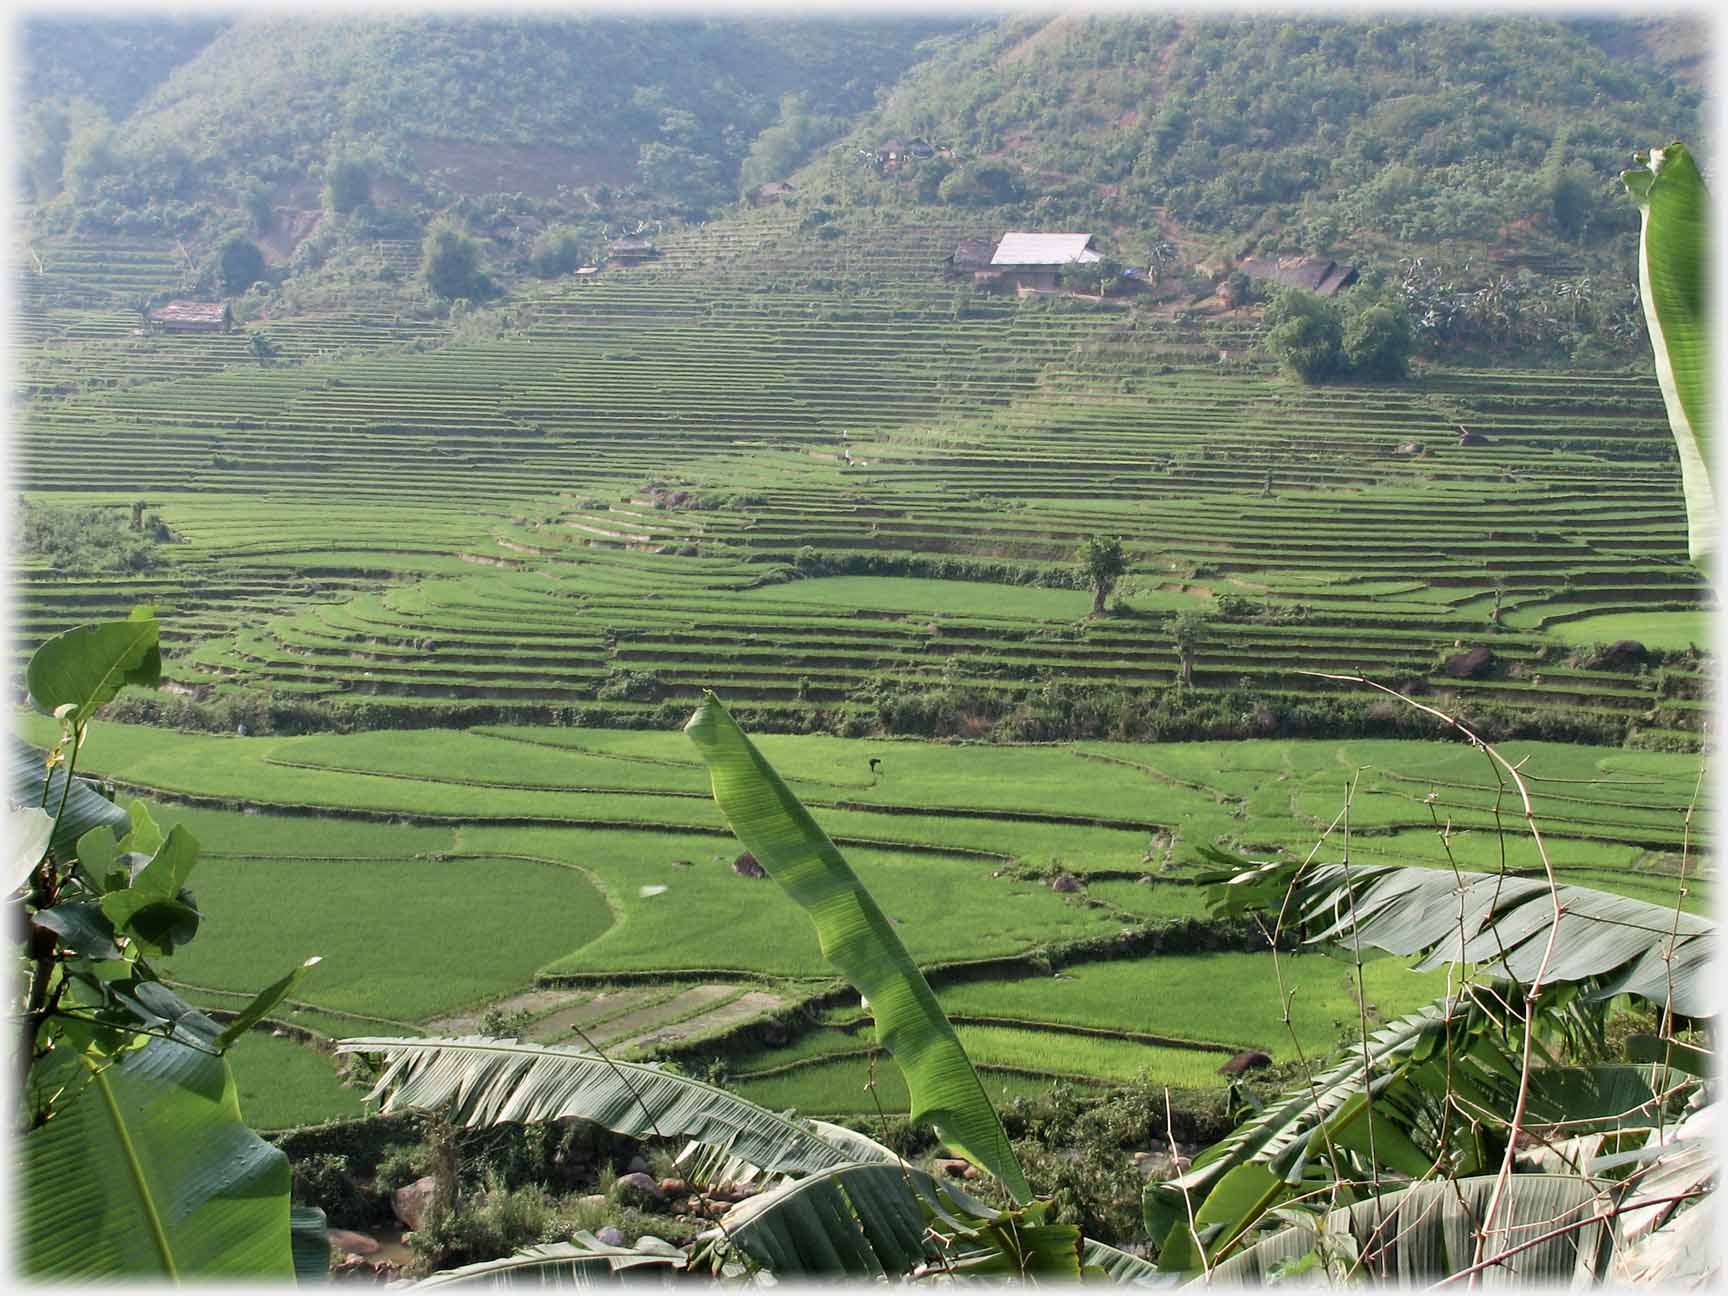 Looking down valley side at green terraces with banana trees in foreground.